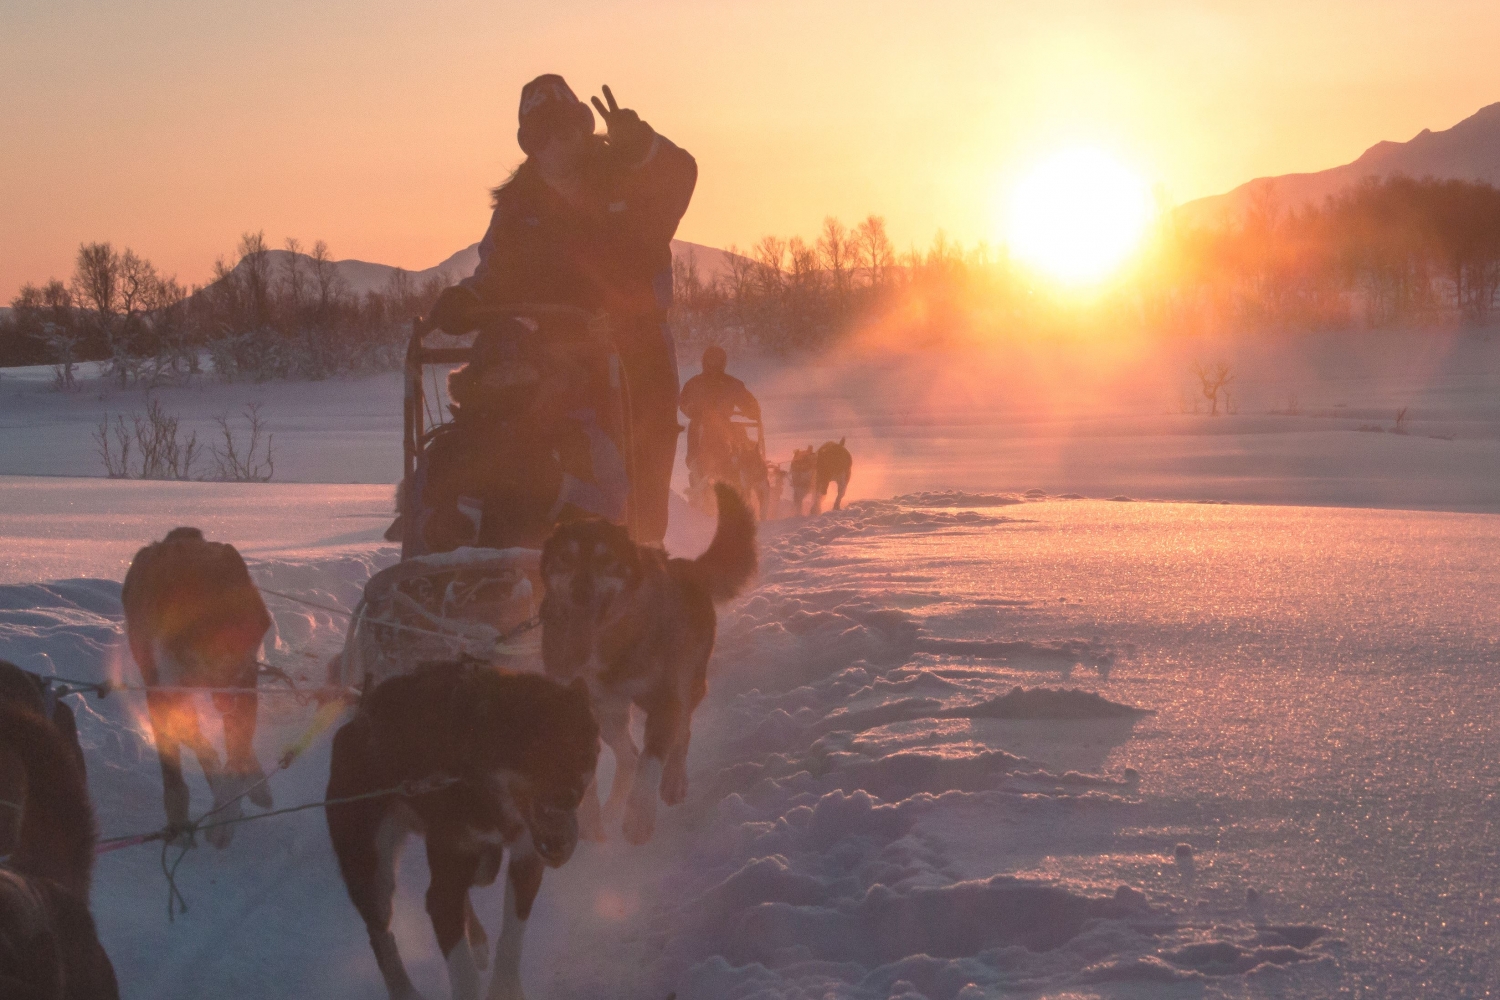 Dog sledding with bright orange sun in the backgrounbd